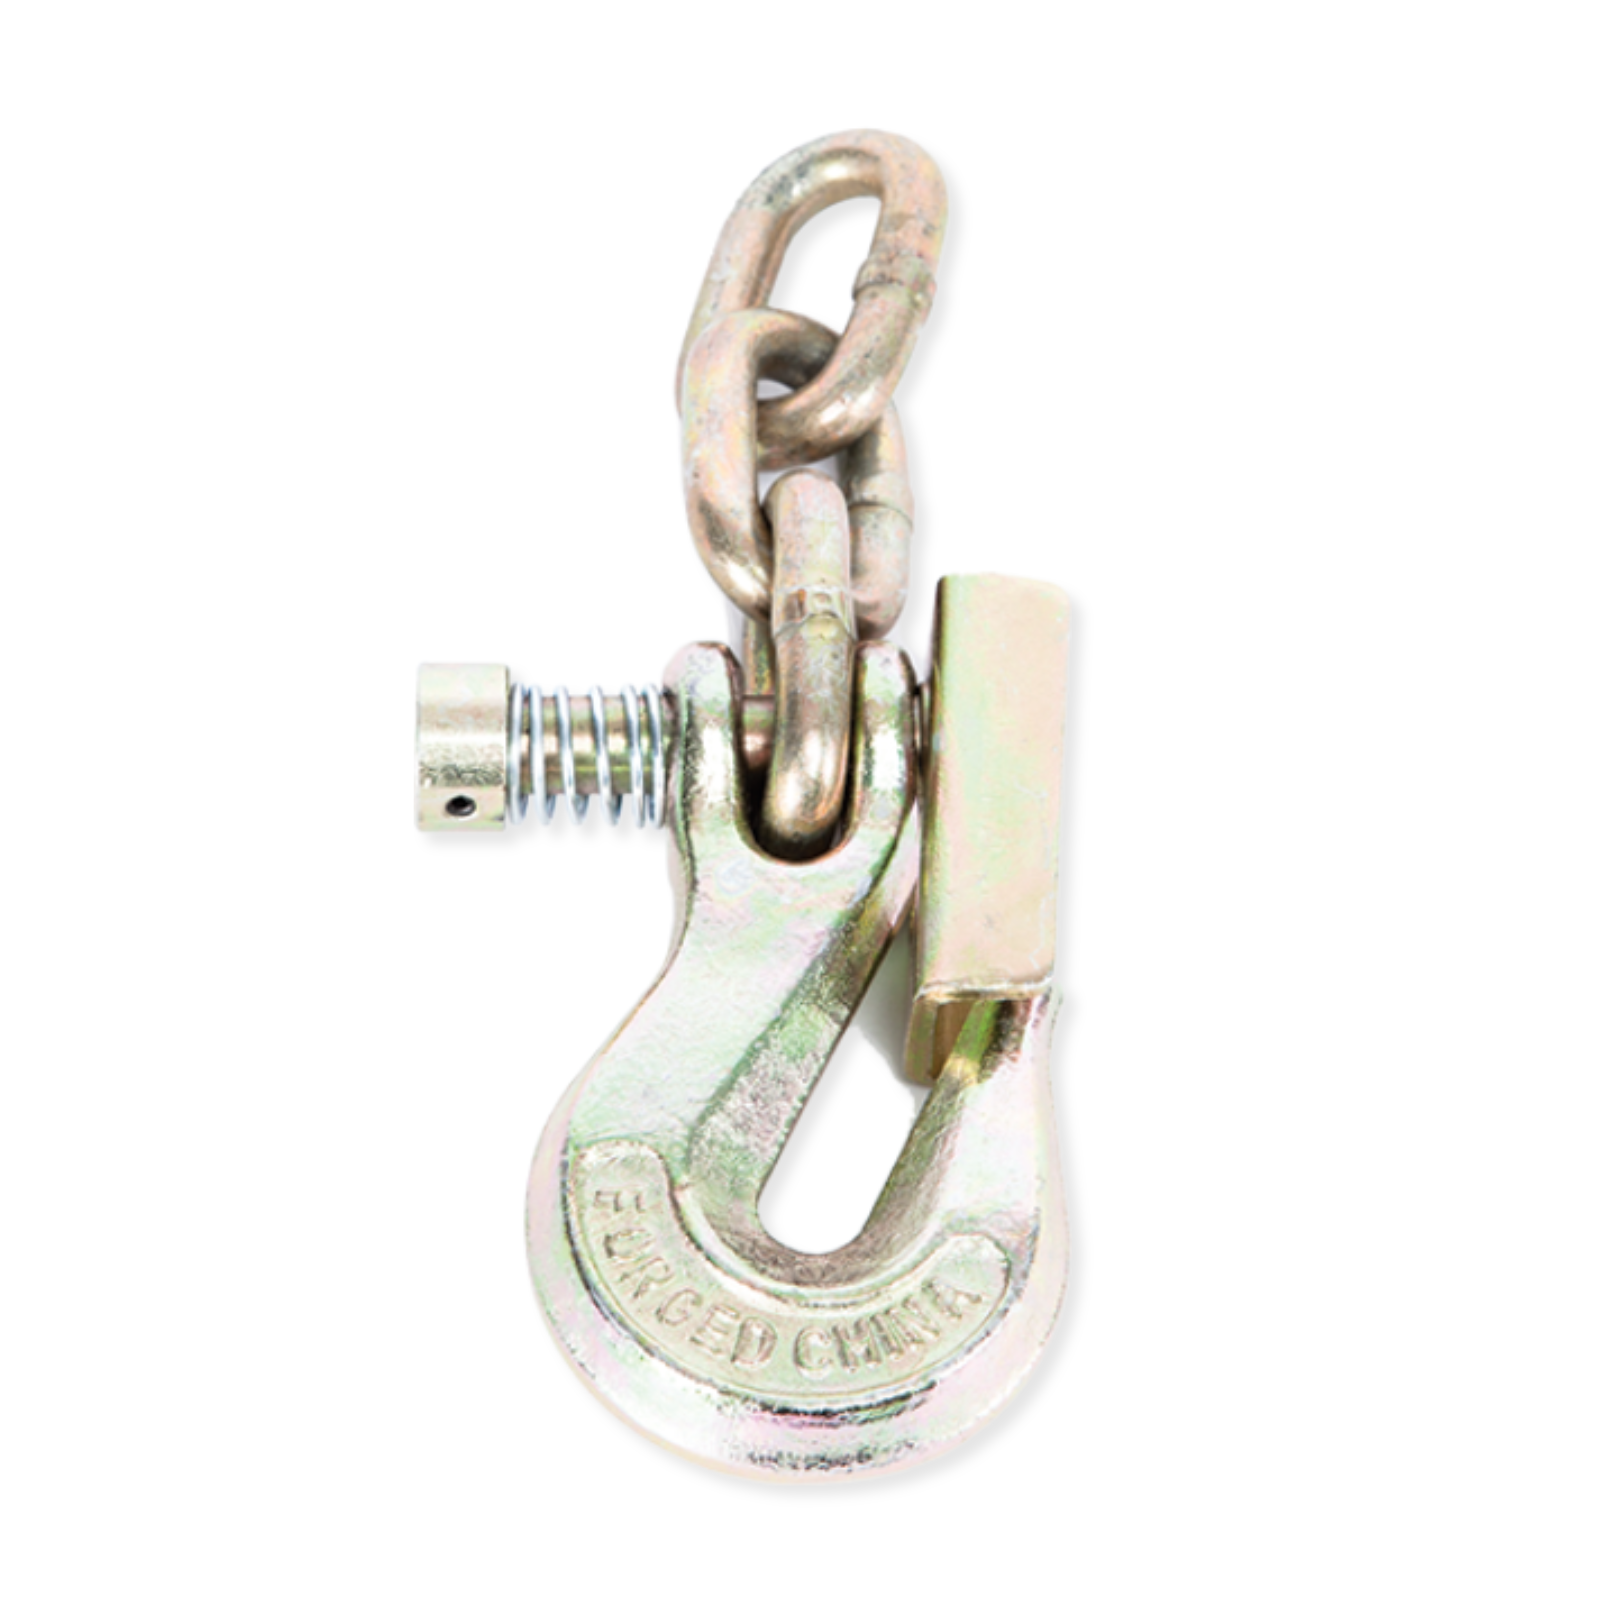 Logging Chain Choker Hook 5/16 and 3/8 and Chain Slip Hook